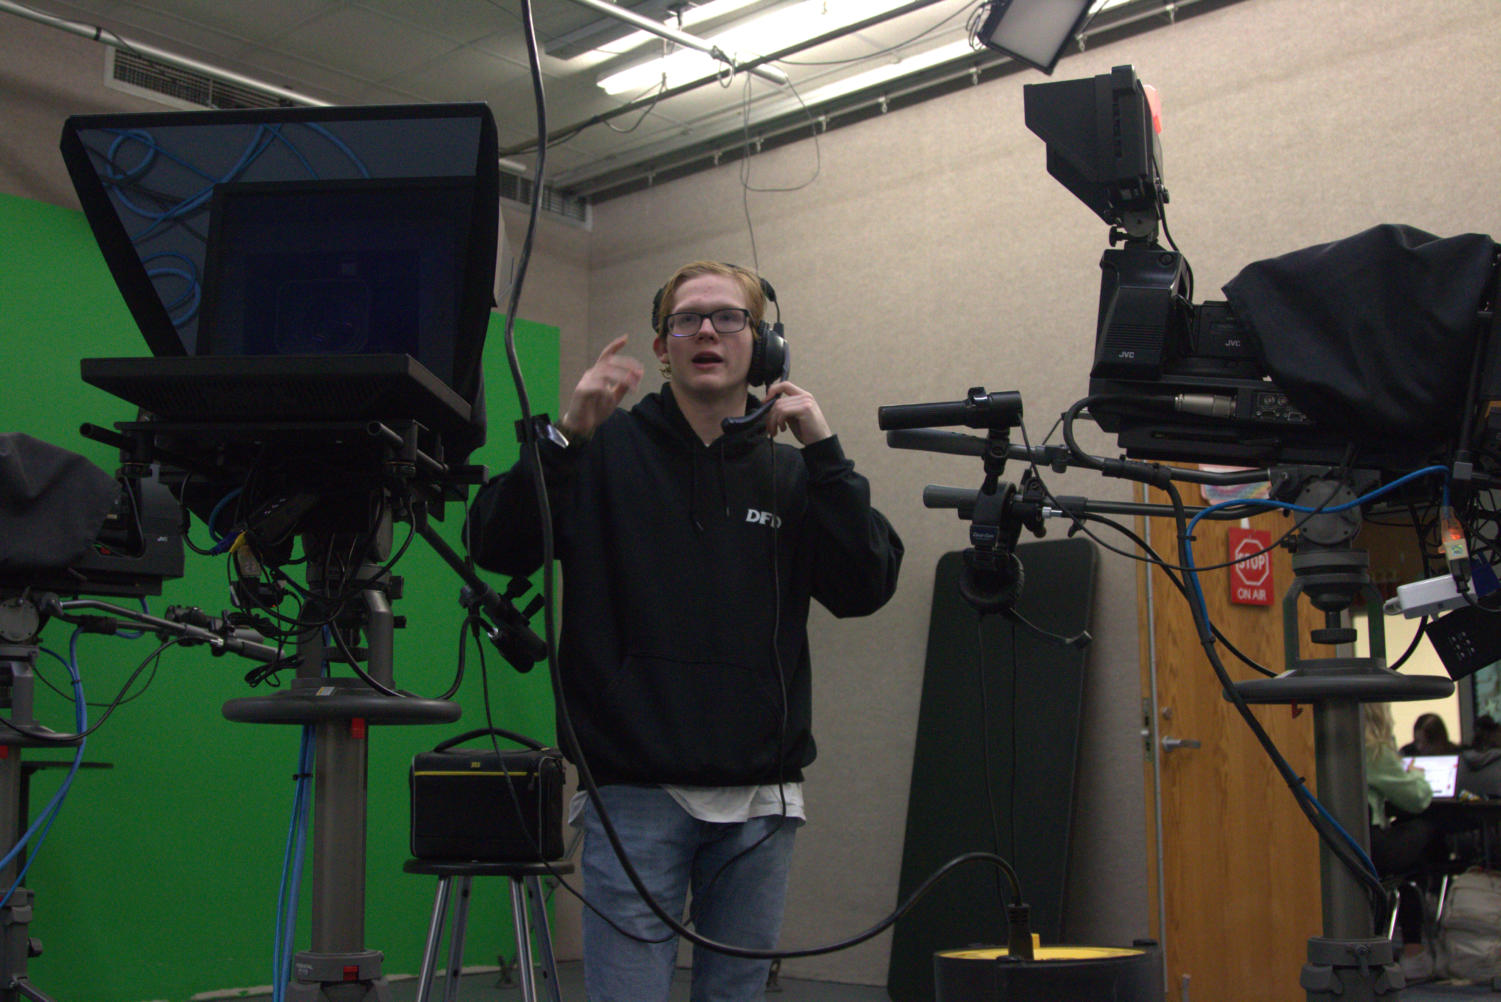 Ryan C. talking to the anchors after getting instructions from the newscast director